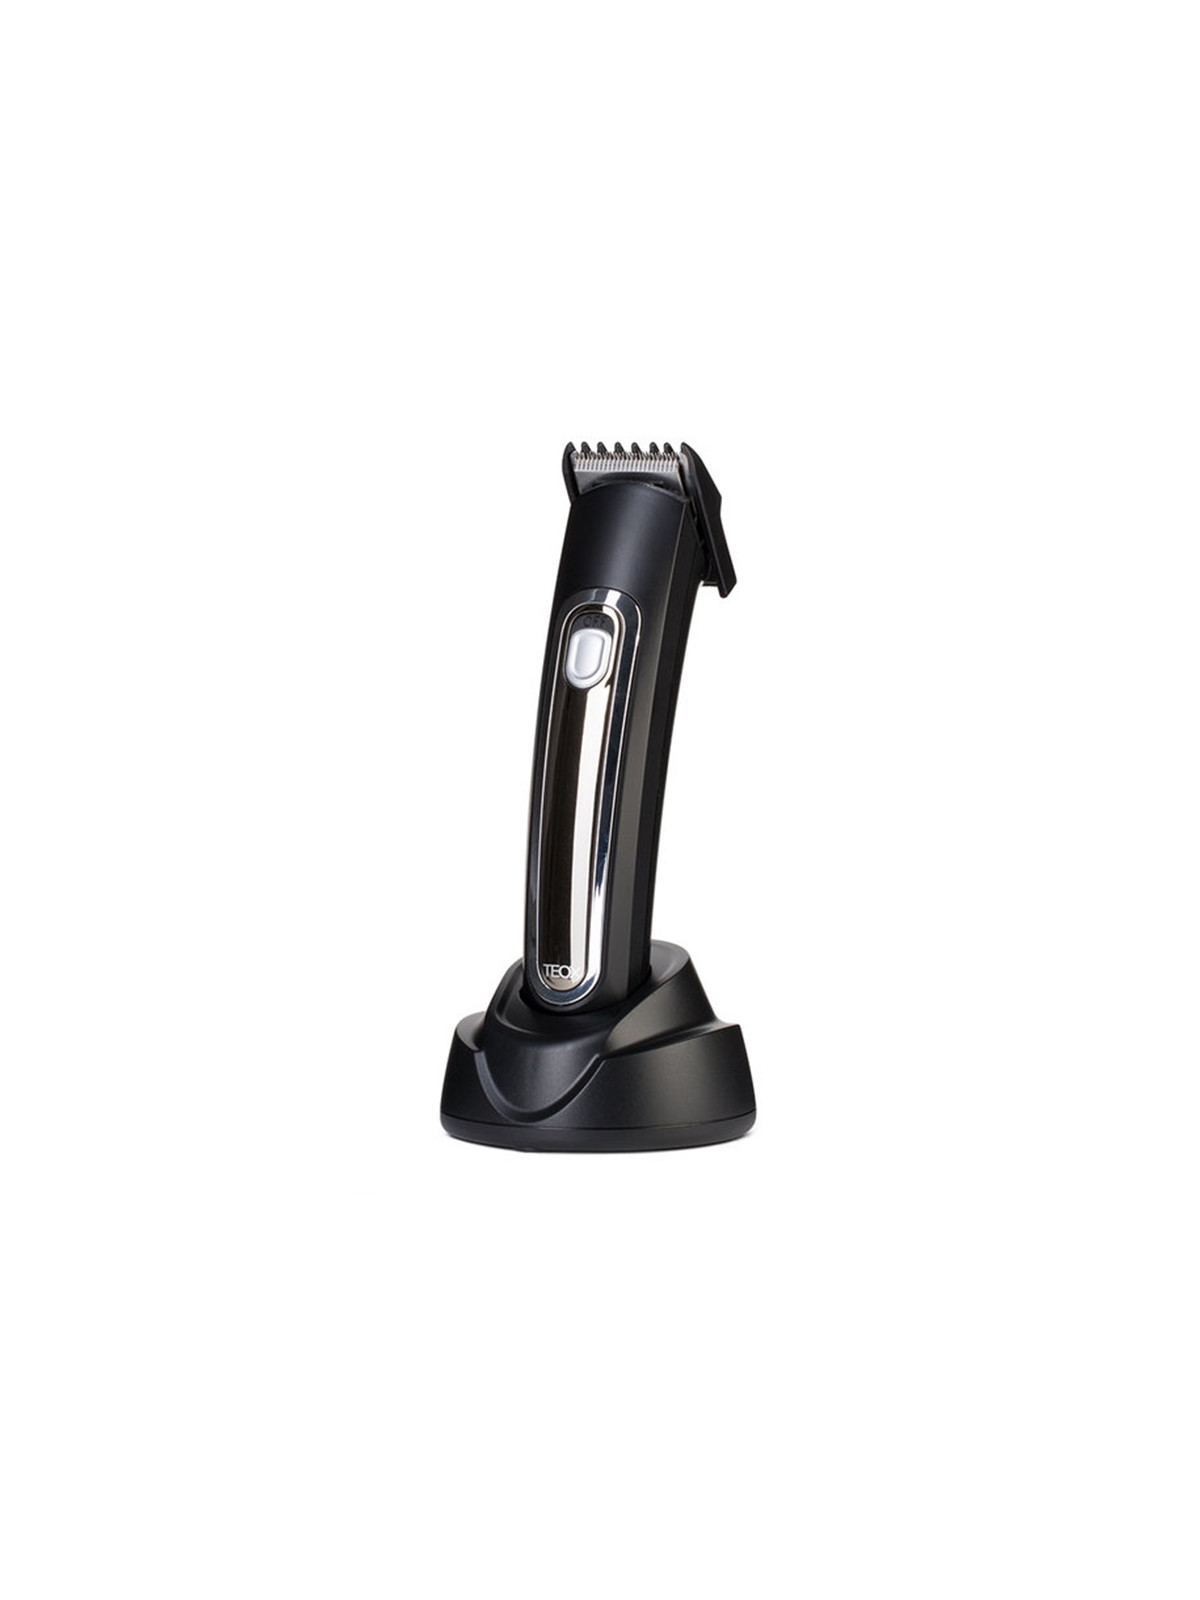 Teox Professional Compact Trimmer